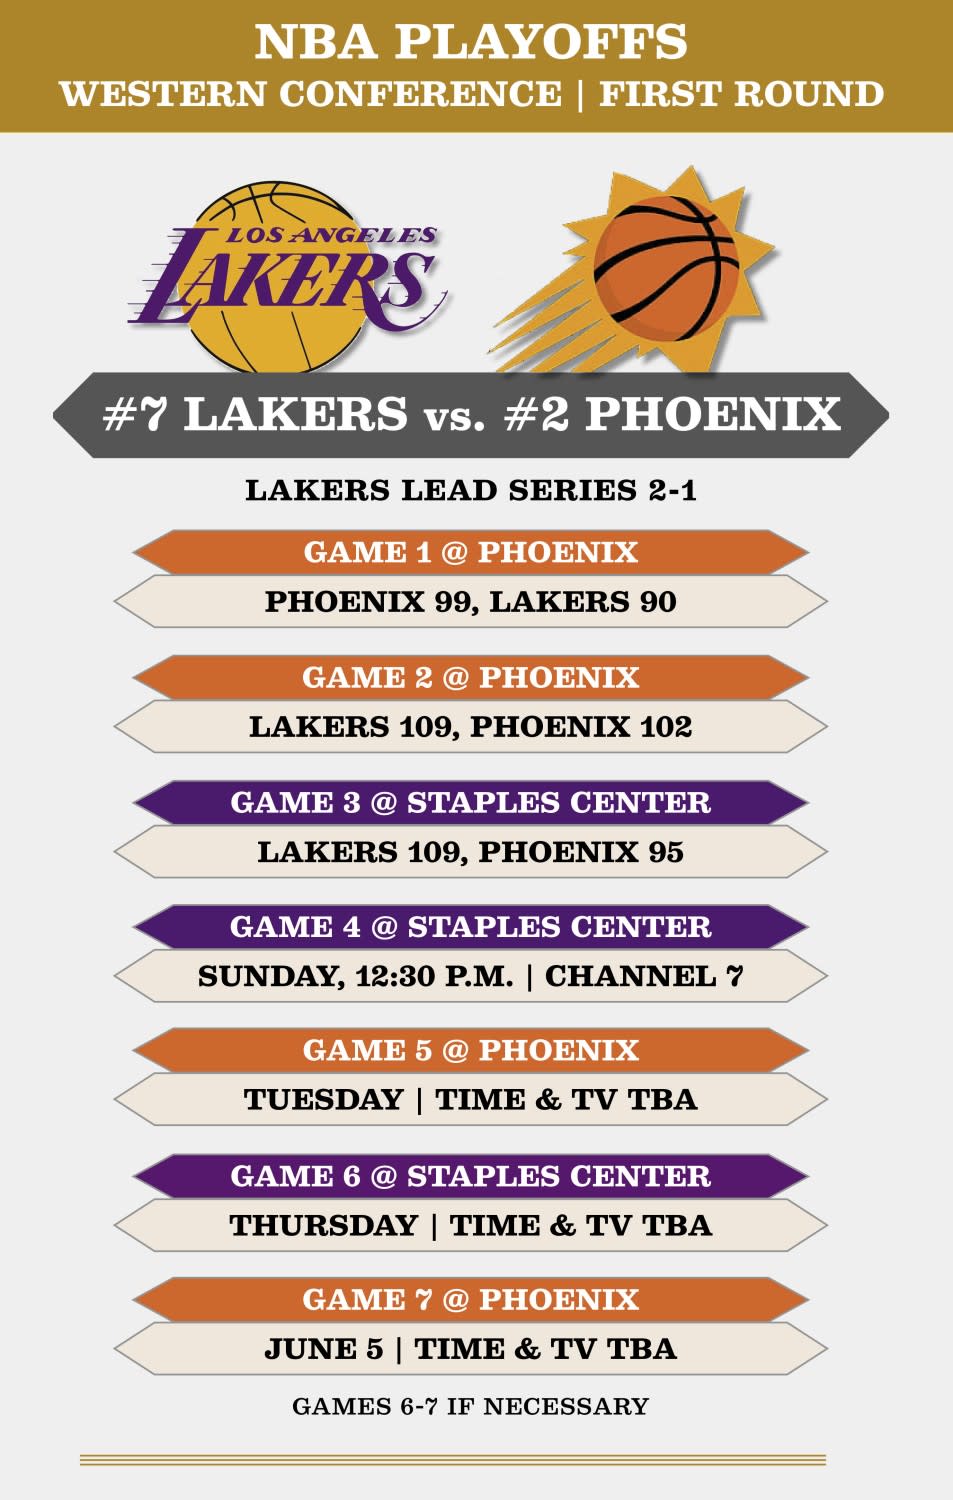 Lakers-Suns schedule for first-round playoff series.